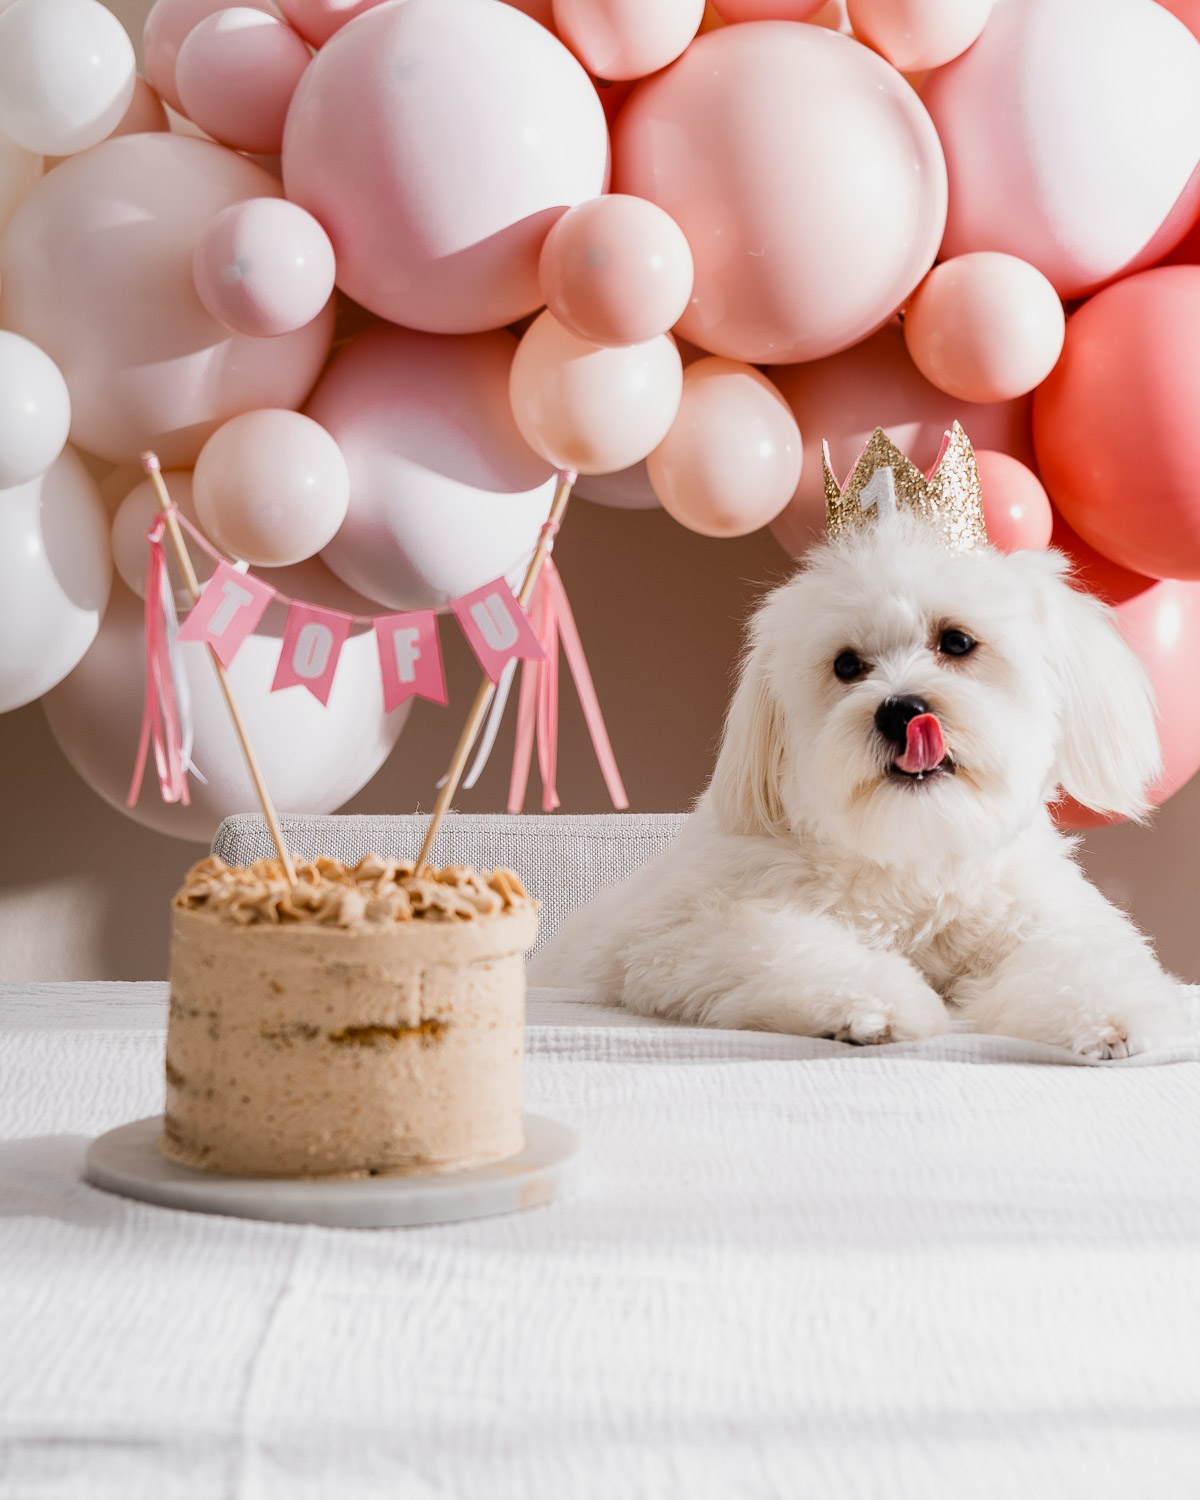 A dog licking its lips while staring at a birthday cake.